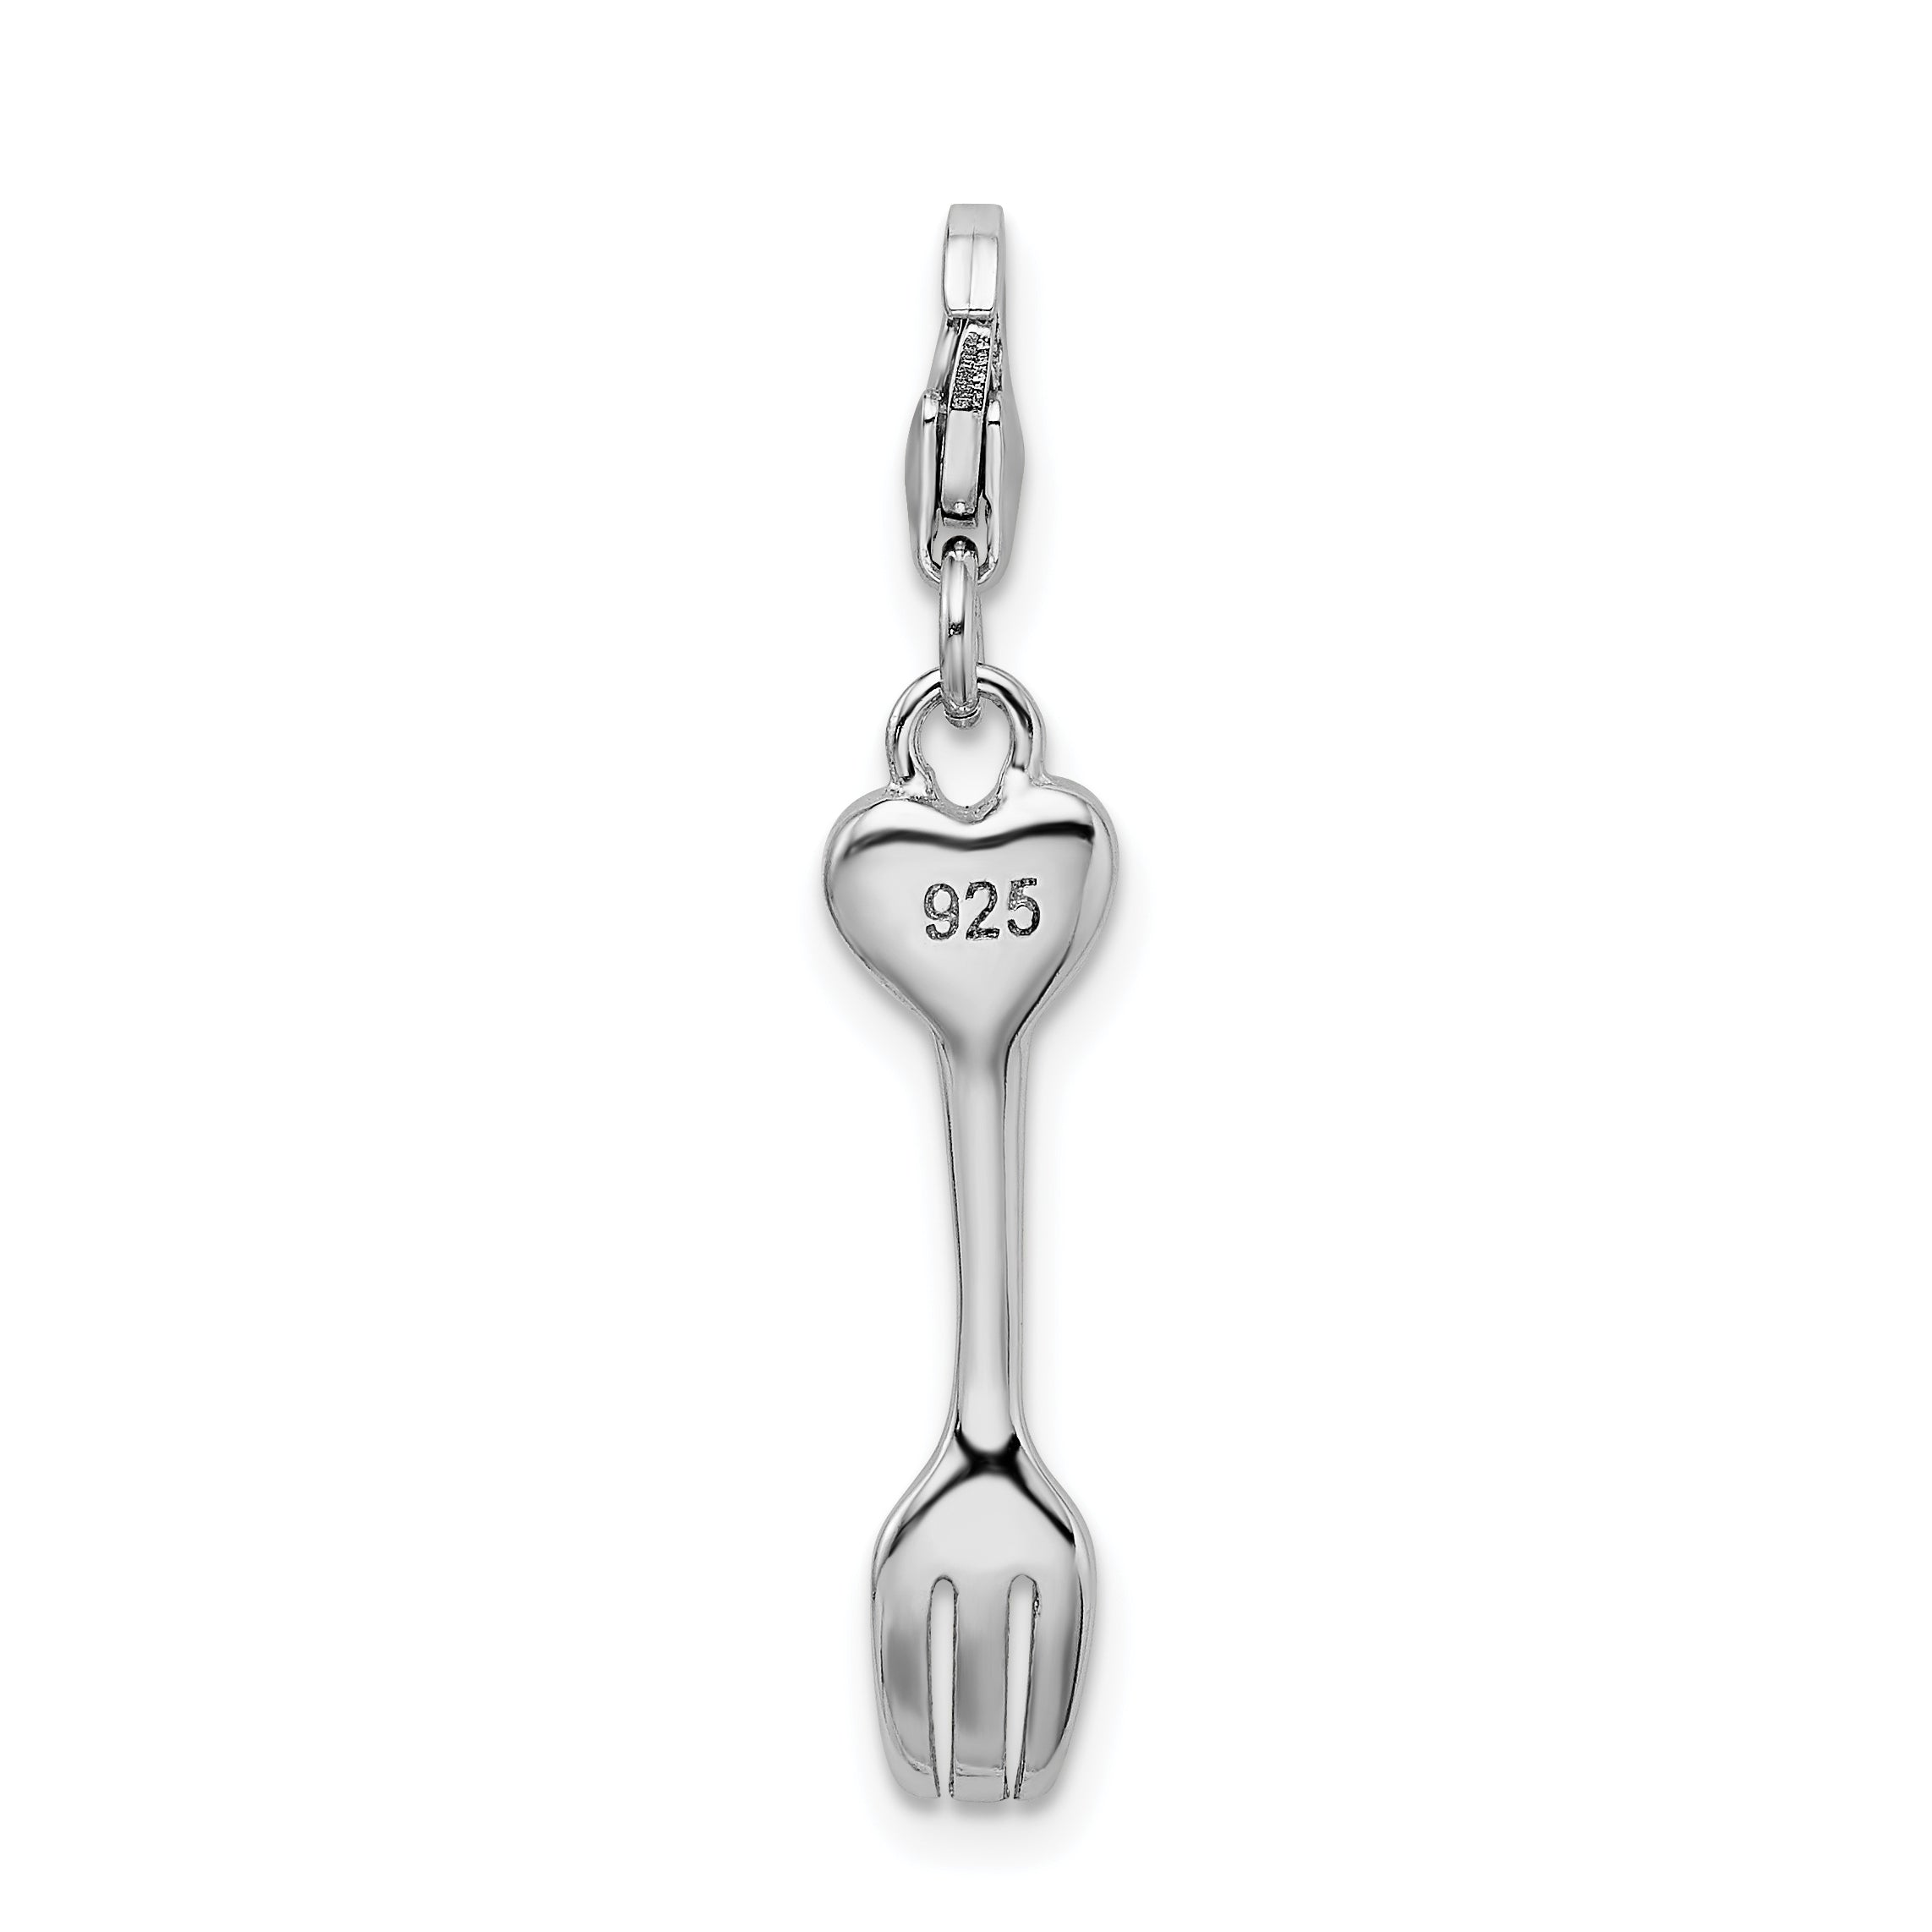 Sterling Silver RH 3-D Flower Heart Fork With Lobster Clasp Charm